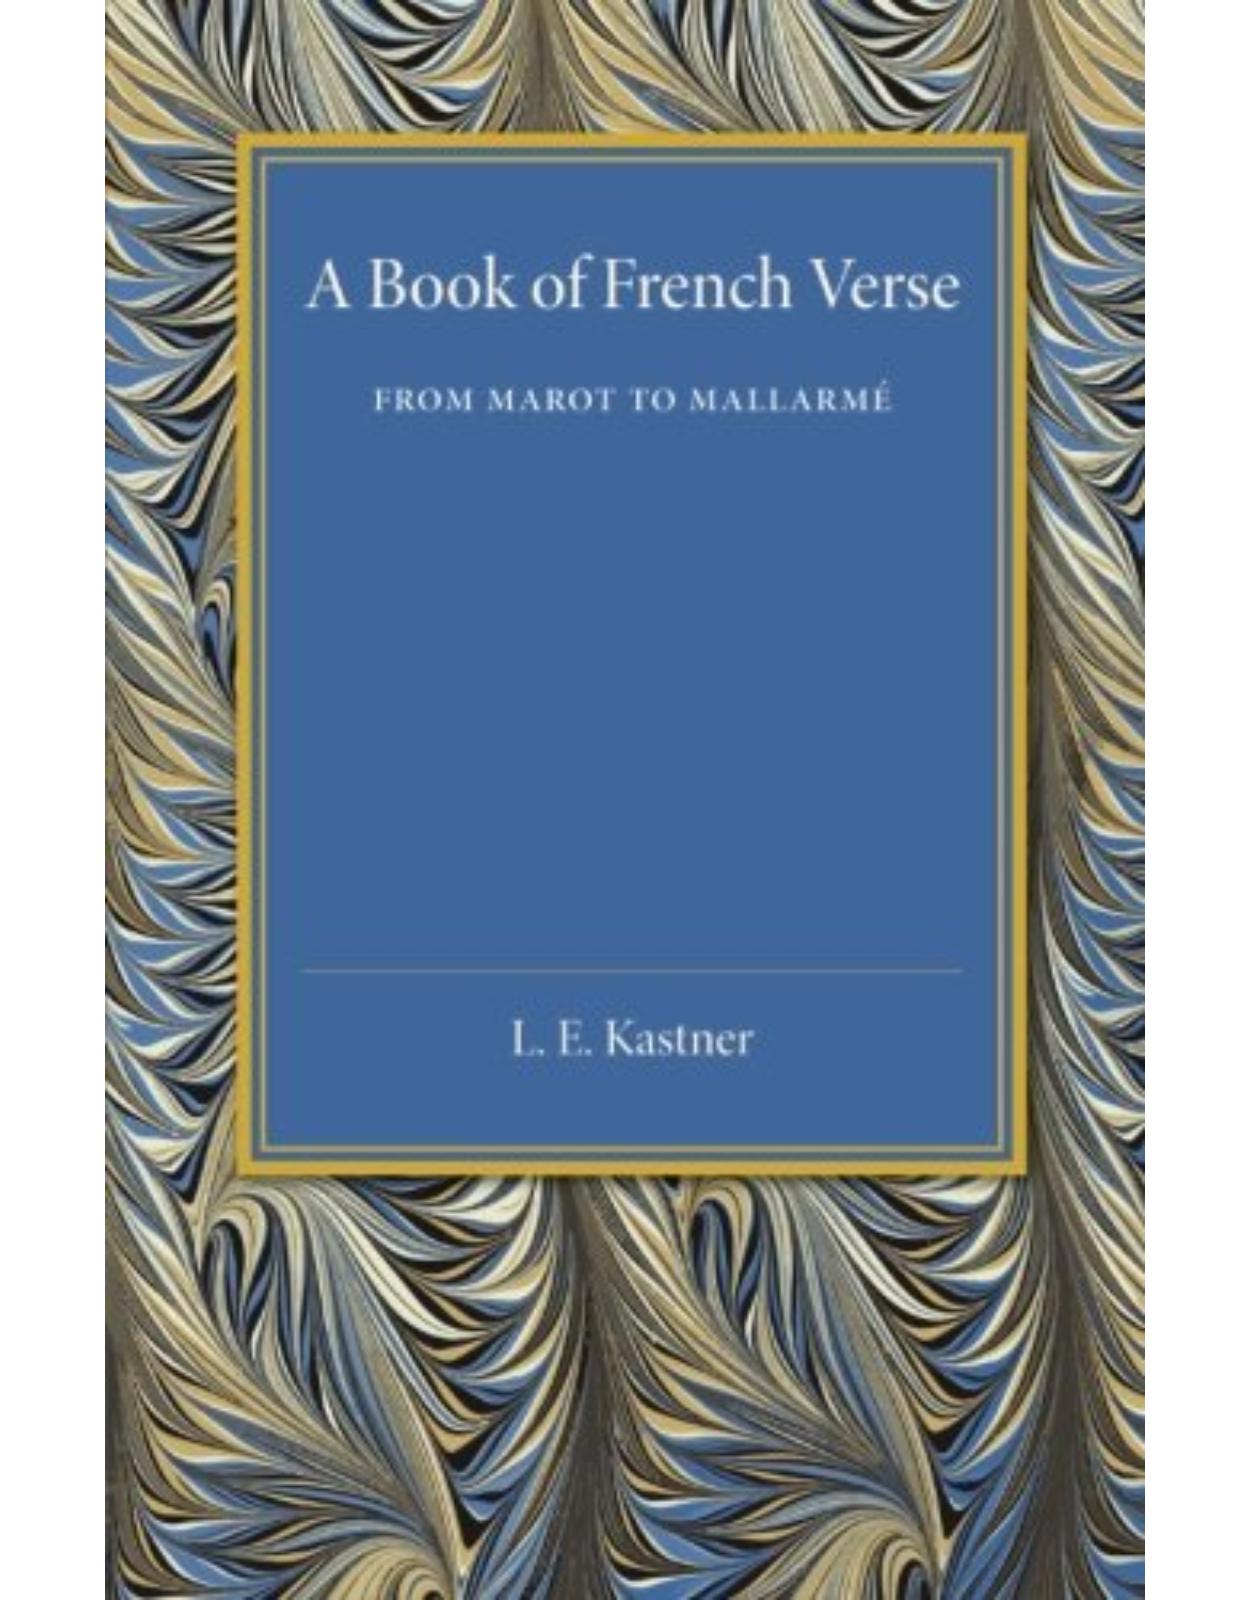 A Book of French Verse: From Marot to Mallarmé